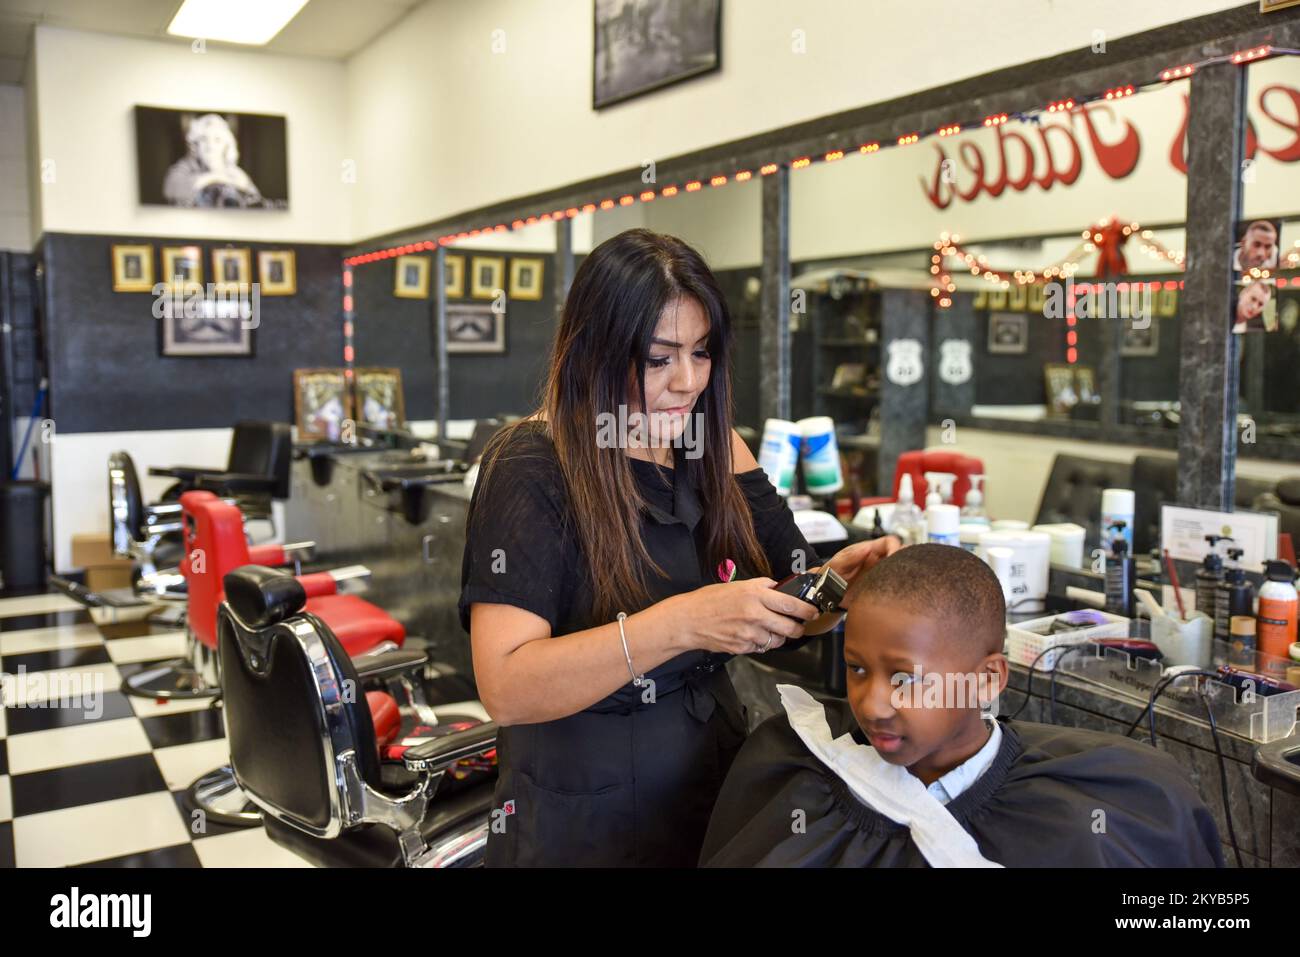 Woman Barber and hairstylist Cutting a young black boy’s hair Stock Photo